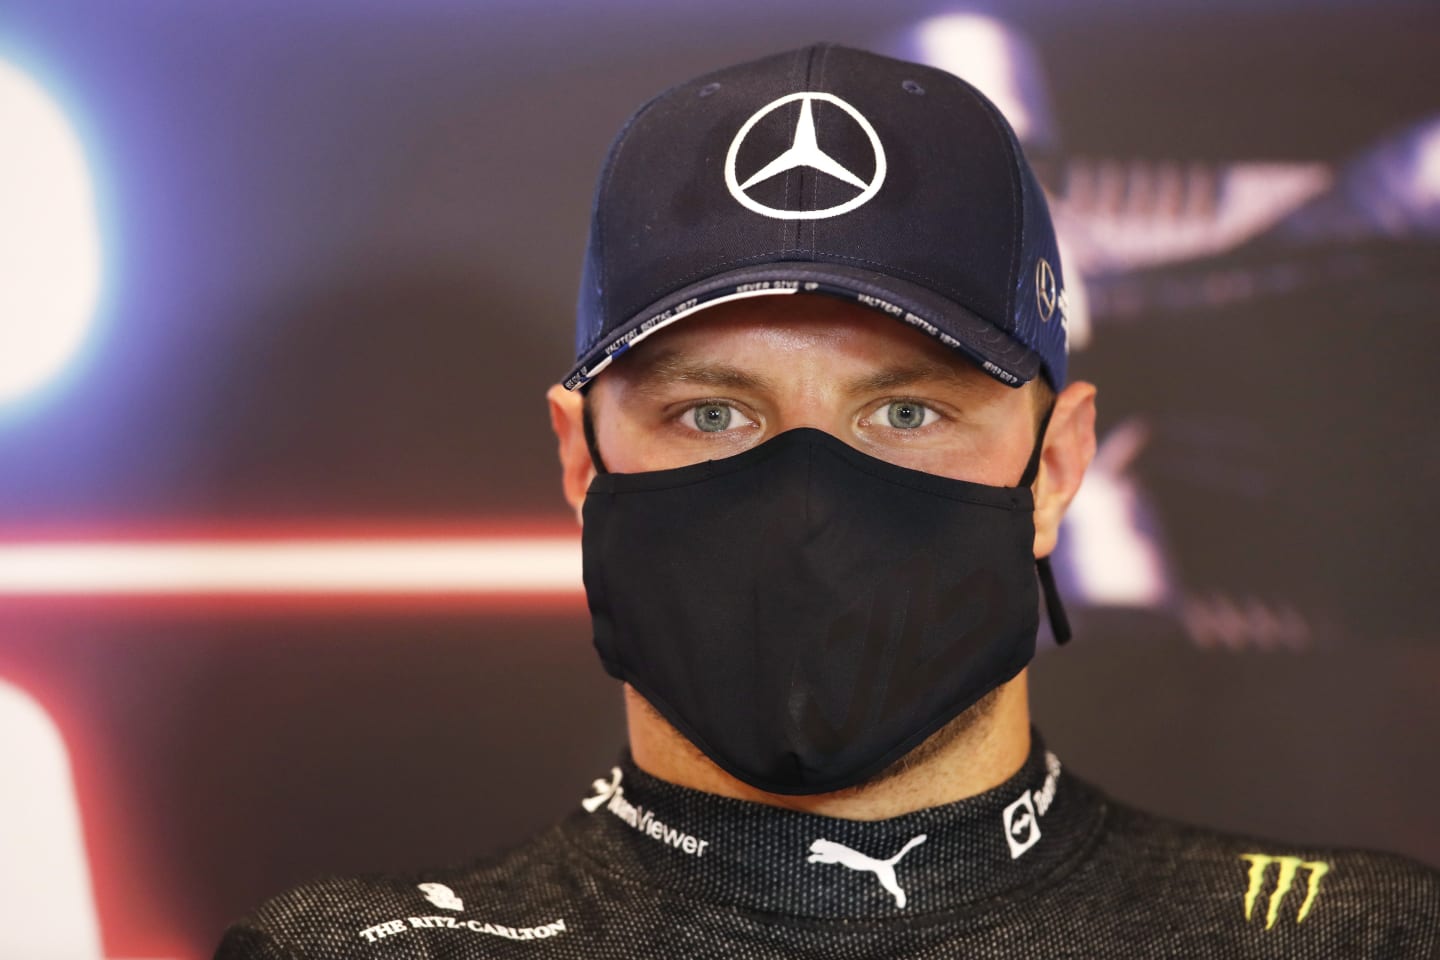 MONTE-CARLO, MONACO - MAY 22: Third placed qualifier Valtteri Bottas of Finland and Mercedes GP talks during a Press Conference after qualifying prior to the F1 Grand Prix of Monaco at Circuit de Monaco on May 22, 2021 in Monte-Carlo, Monaco. (Photo by Pool/Getty Images)